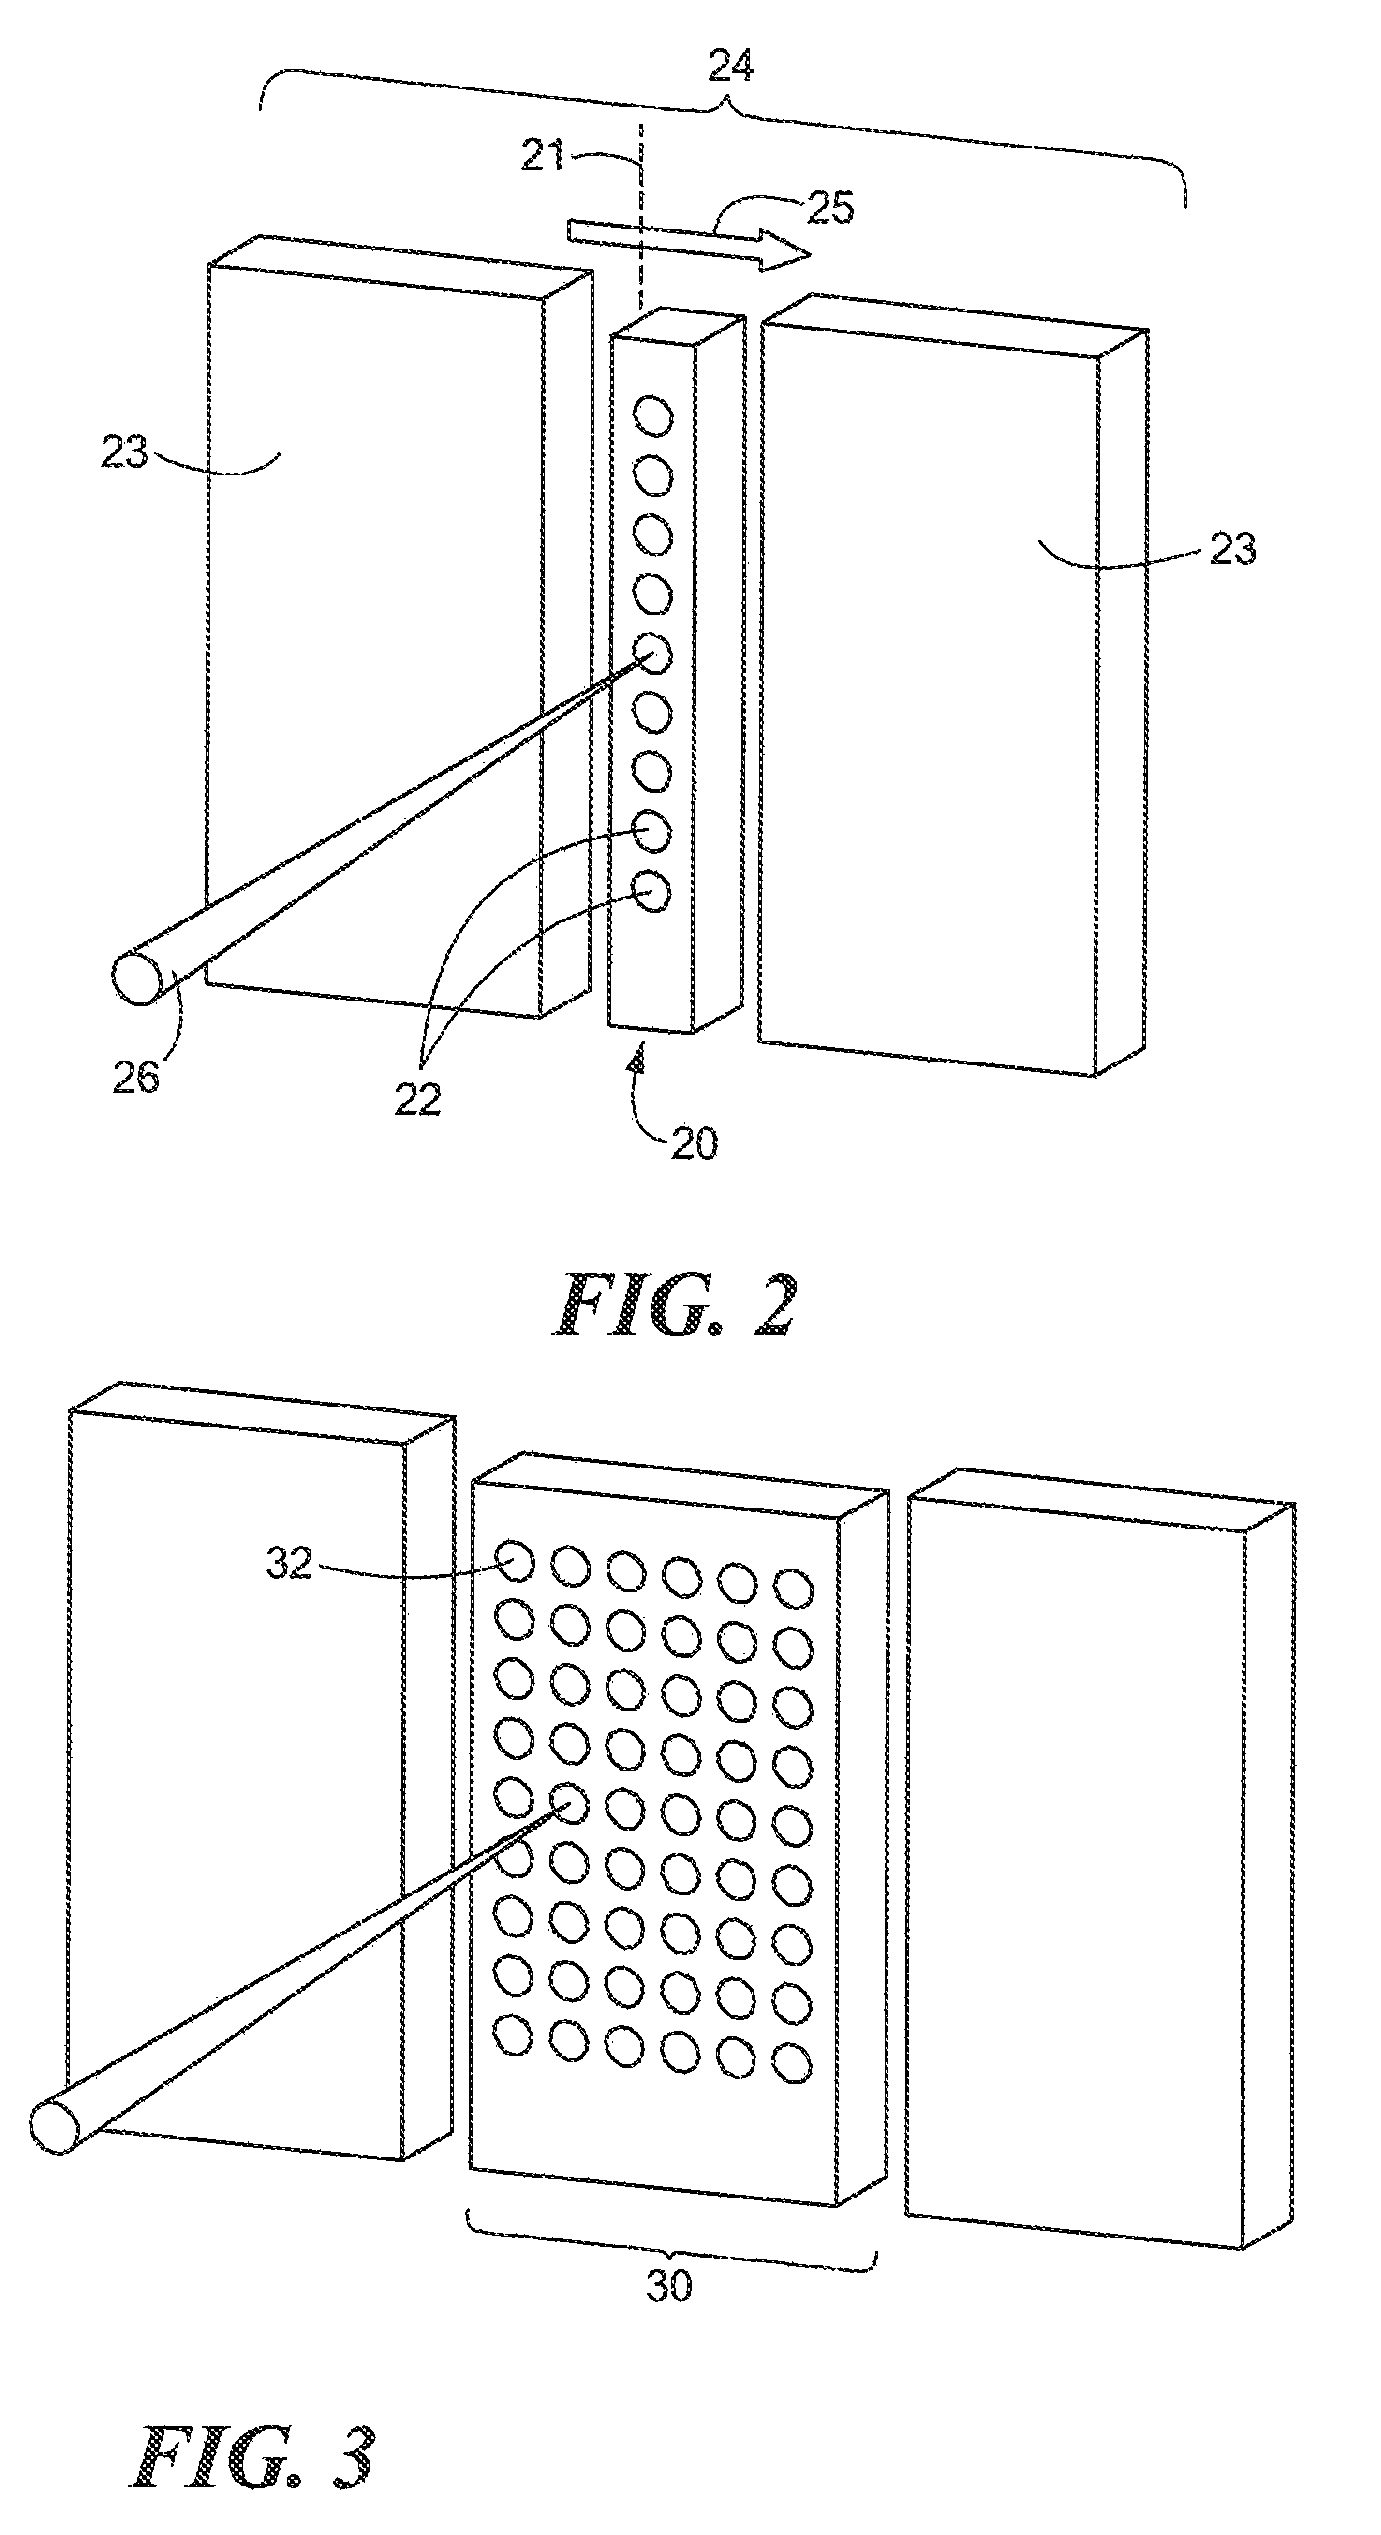 X-ray imaging of baggage and personnel using arrays of discrete sources and multiple collimated beams